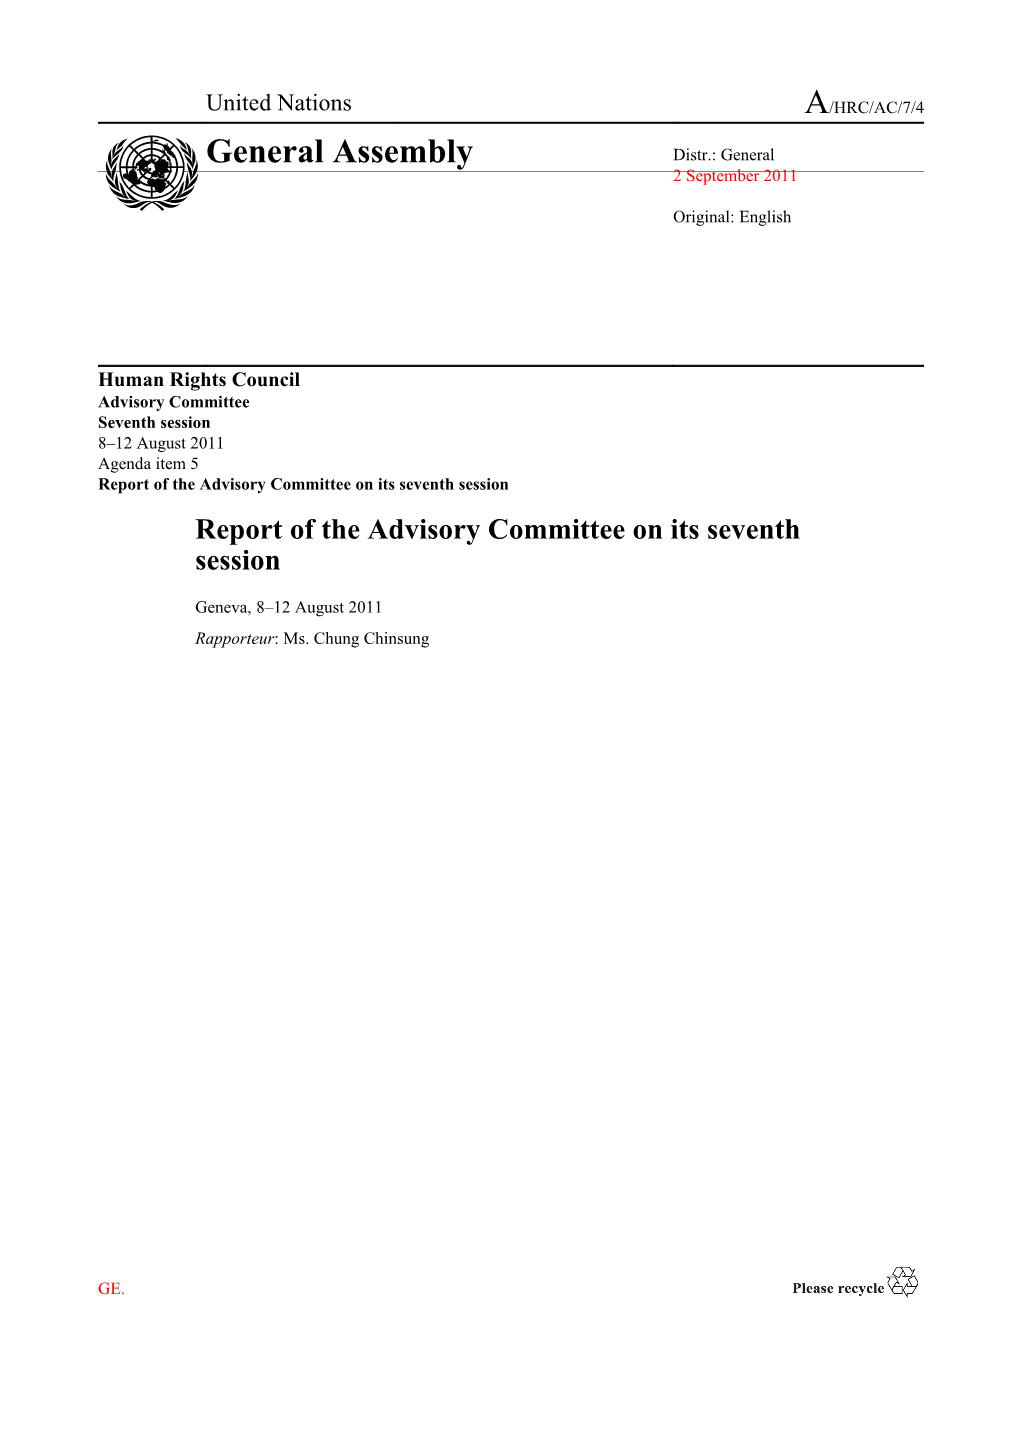 Report of the Advisory Committee on Its Seventh Session